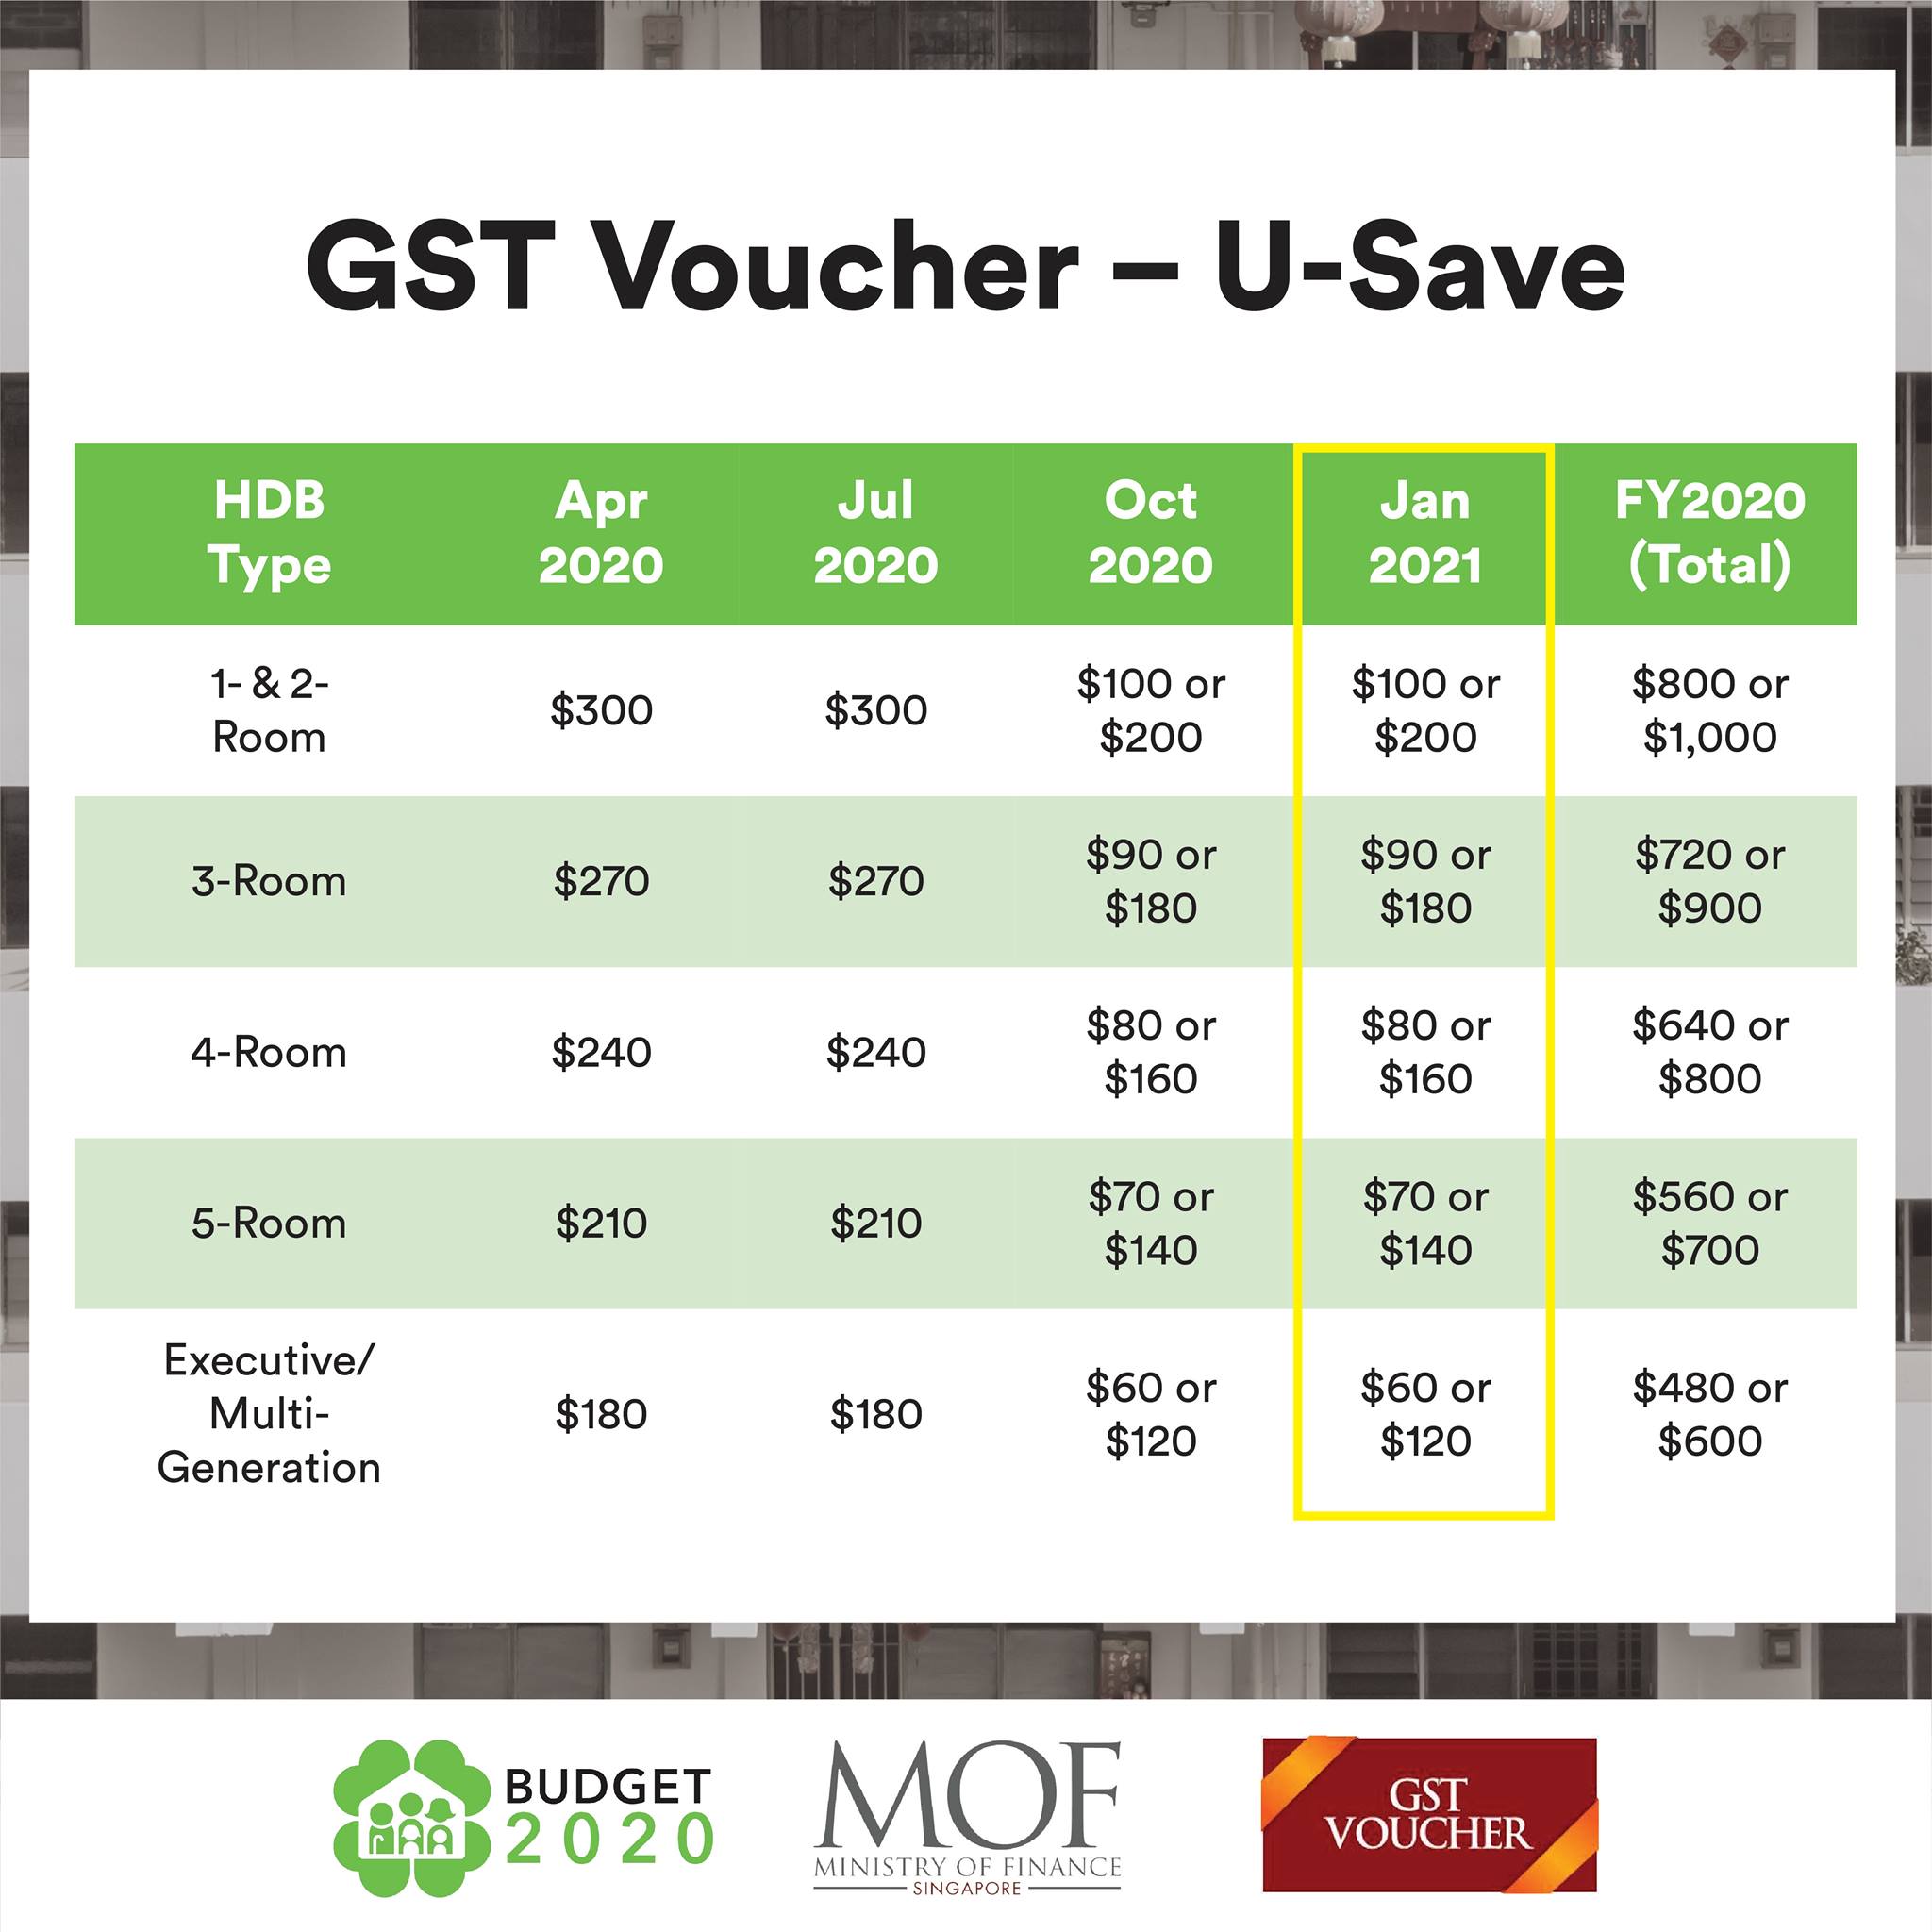 940-000-households-in-s-pore-will-receive-double-their-regular-gst-voucher-u-save-rebates-for-fy